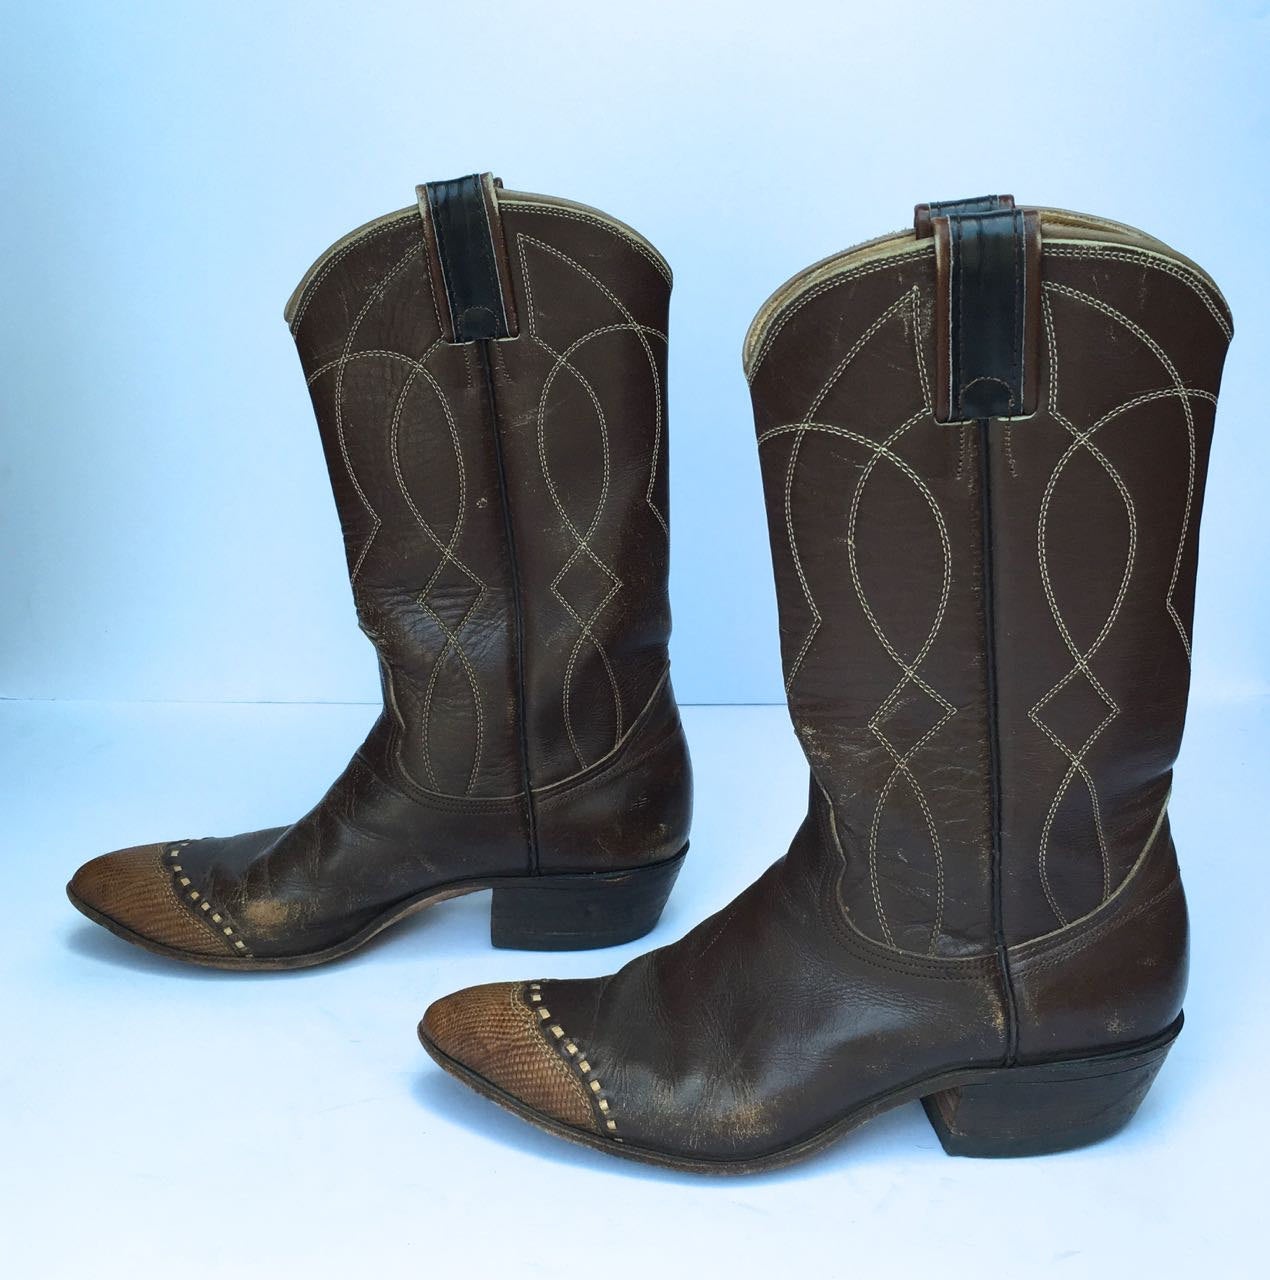 American Vintage 70s Boots for Women